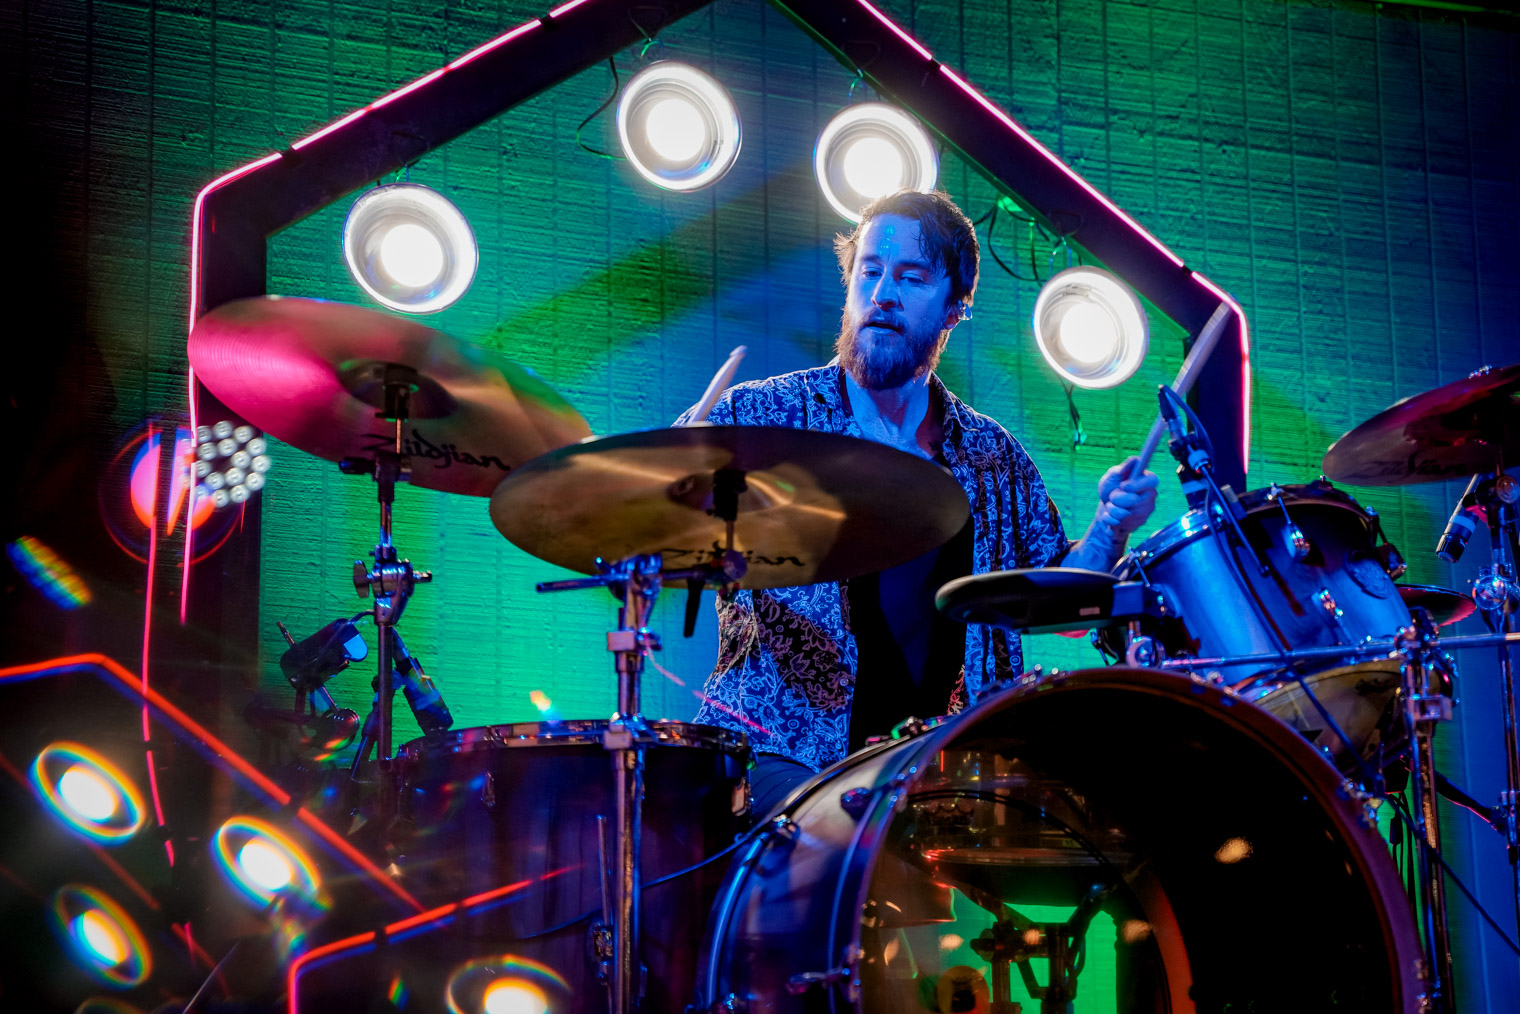 A drummer on stage